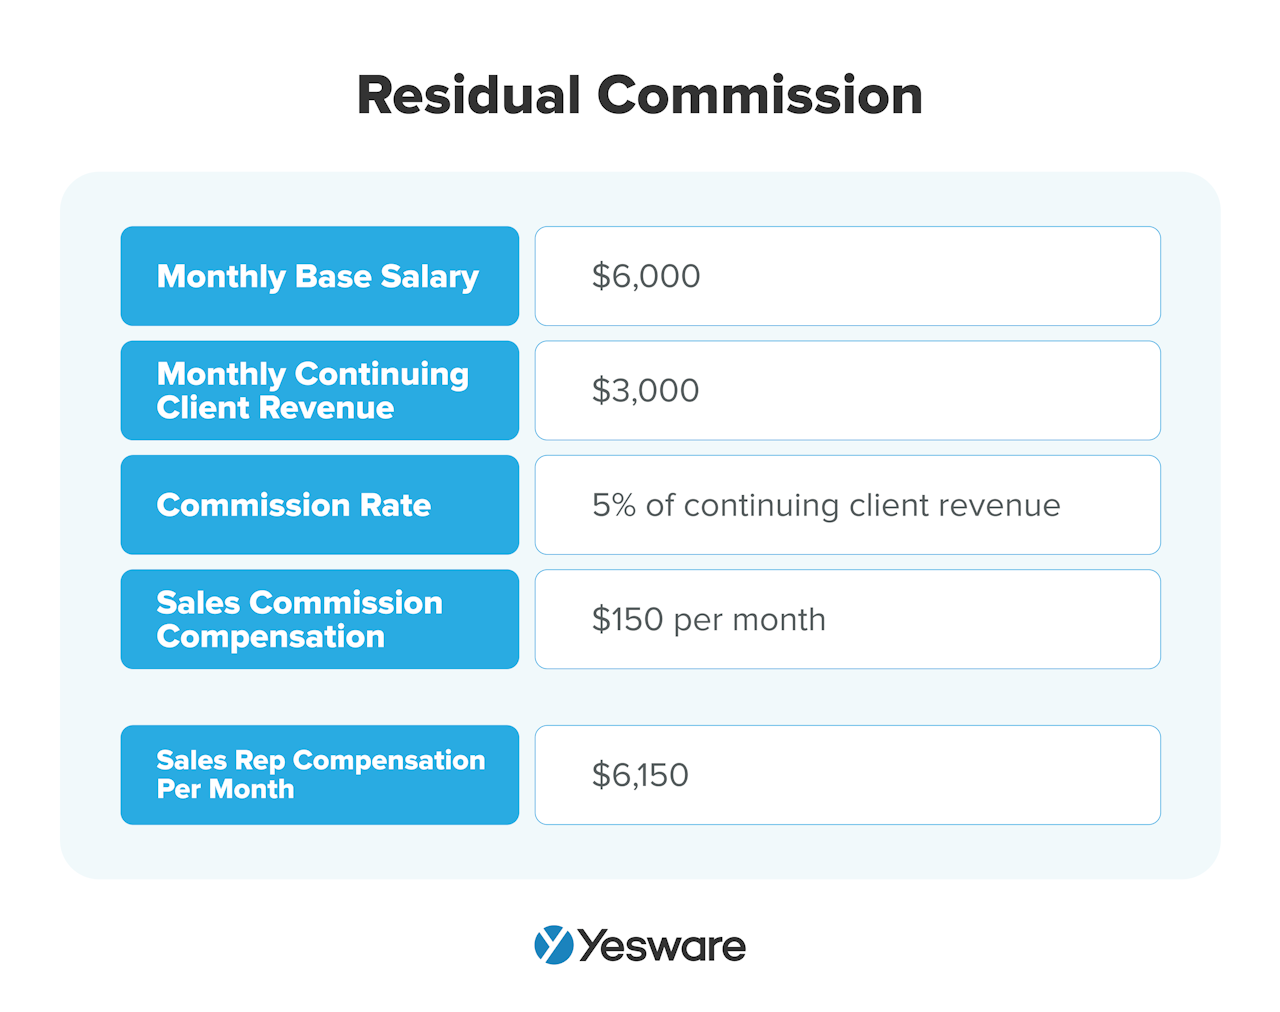 Sales Commission Structure: Residual Commission